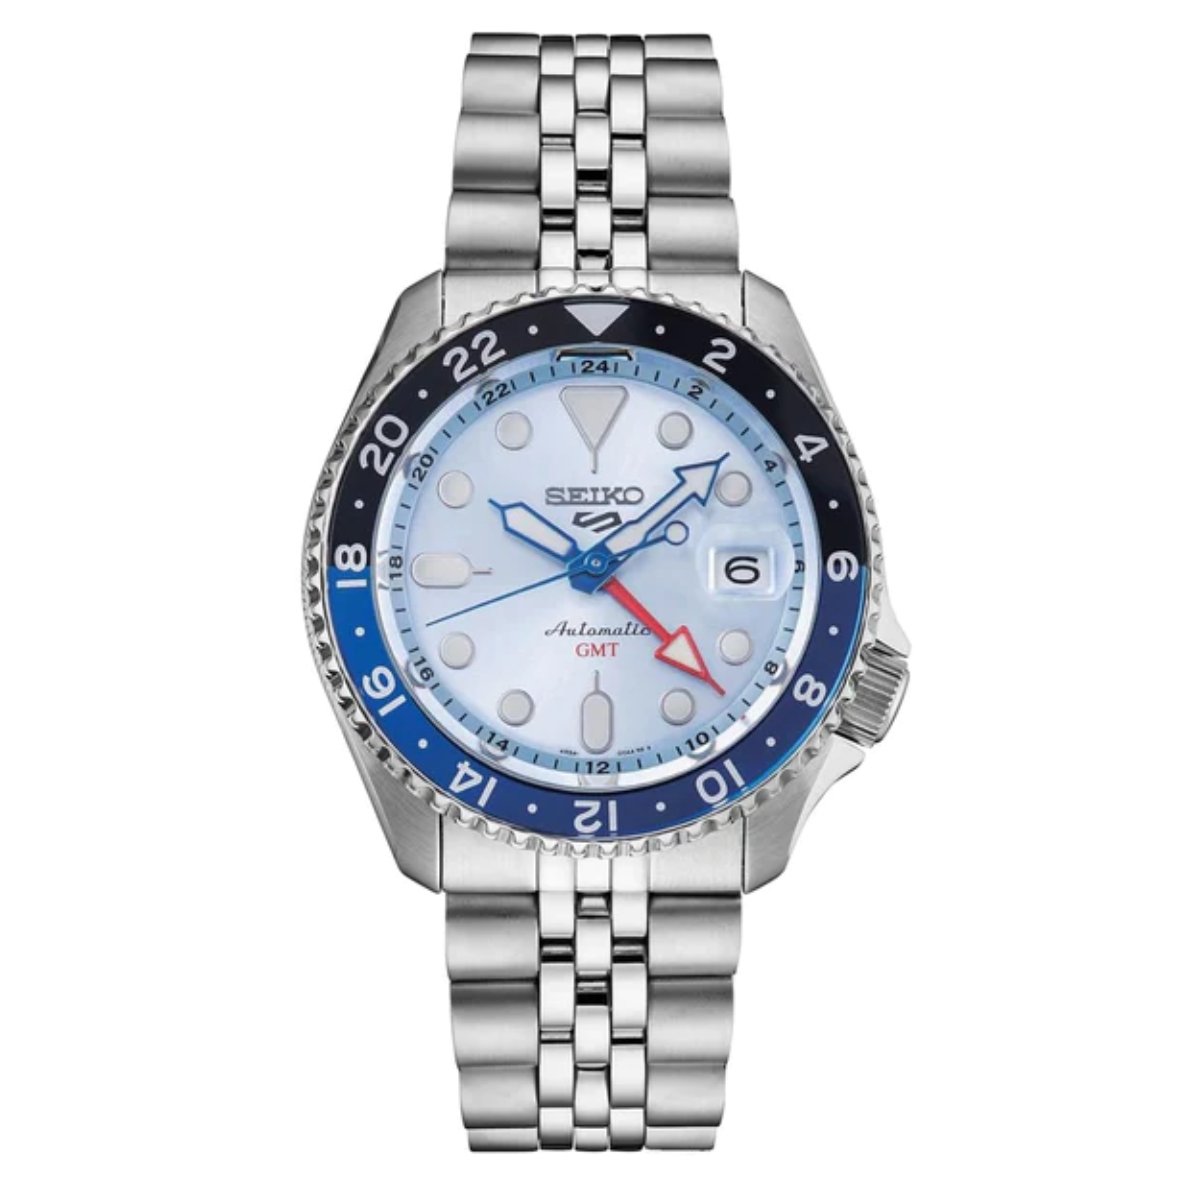 Seiko 5 Sports GMT SSK029K SSK029K1 SSK029 Limited Edition Automatic Watch (PRE-ORDER) -Seiko